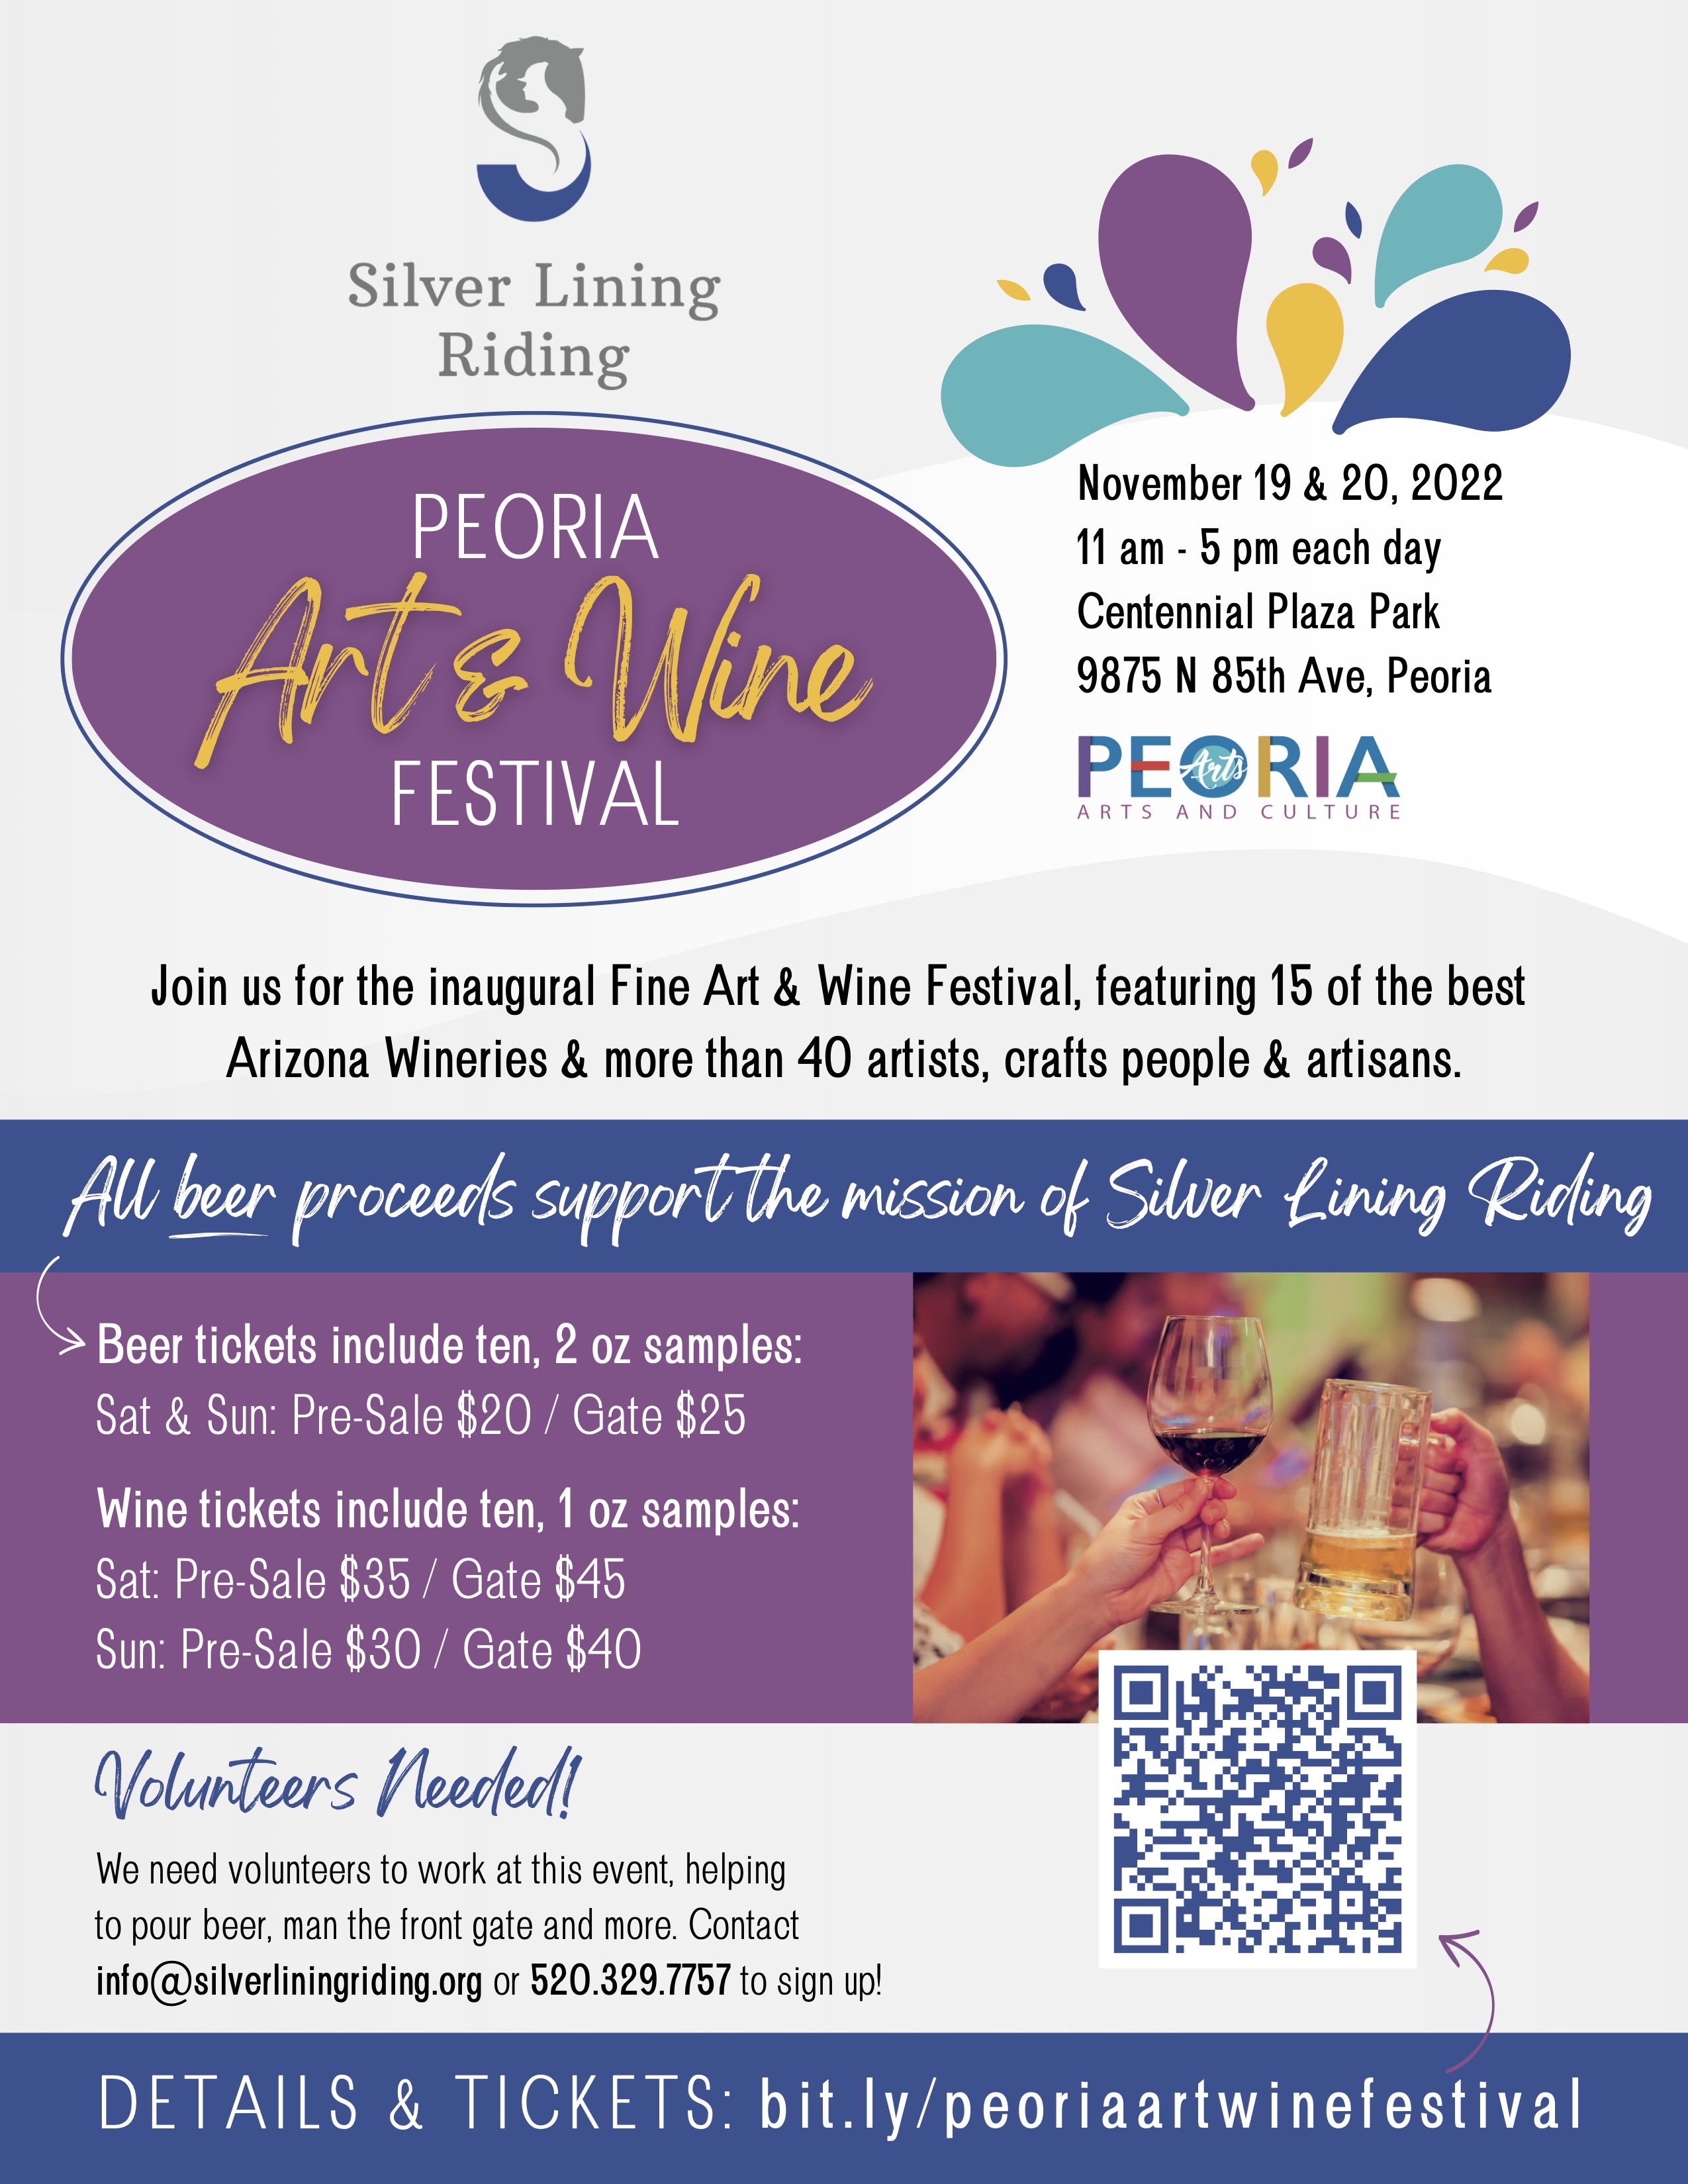 Support Silver Lining Riding at this fantastic event - Peoria Art & Wine Festival!